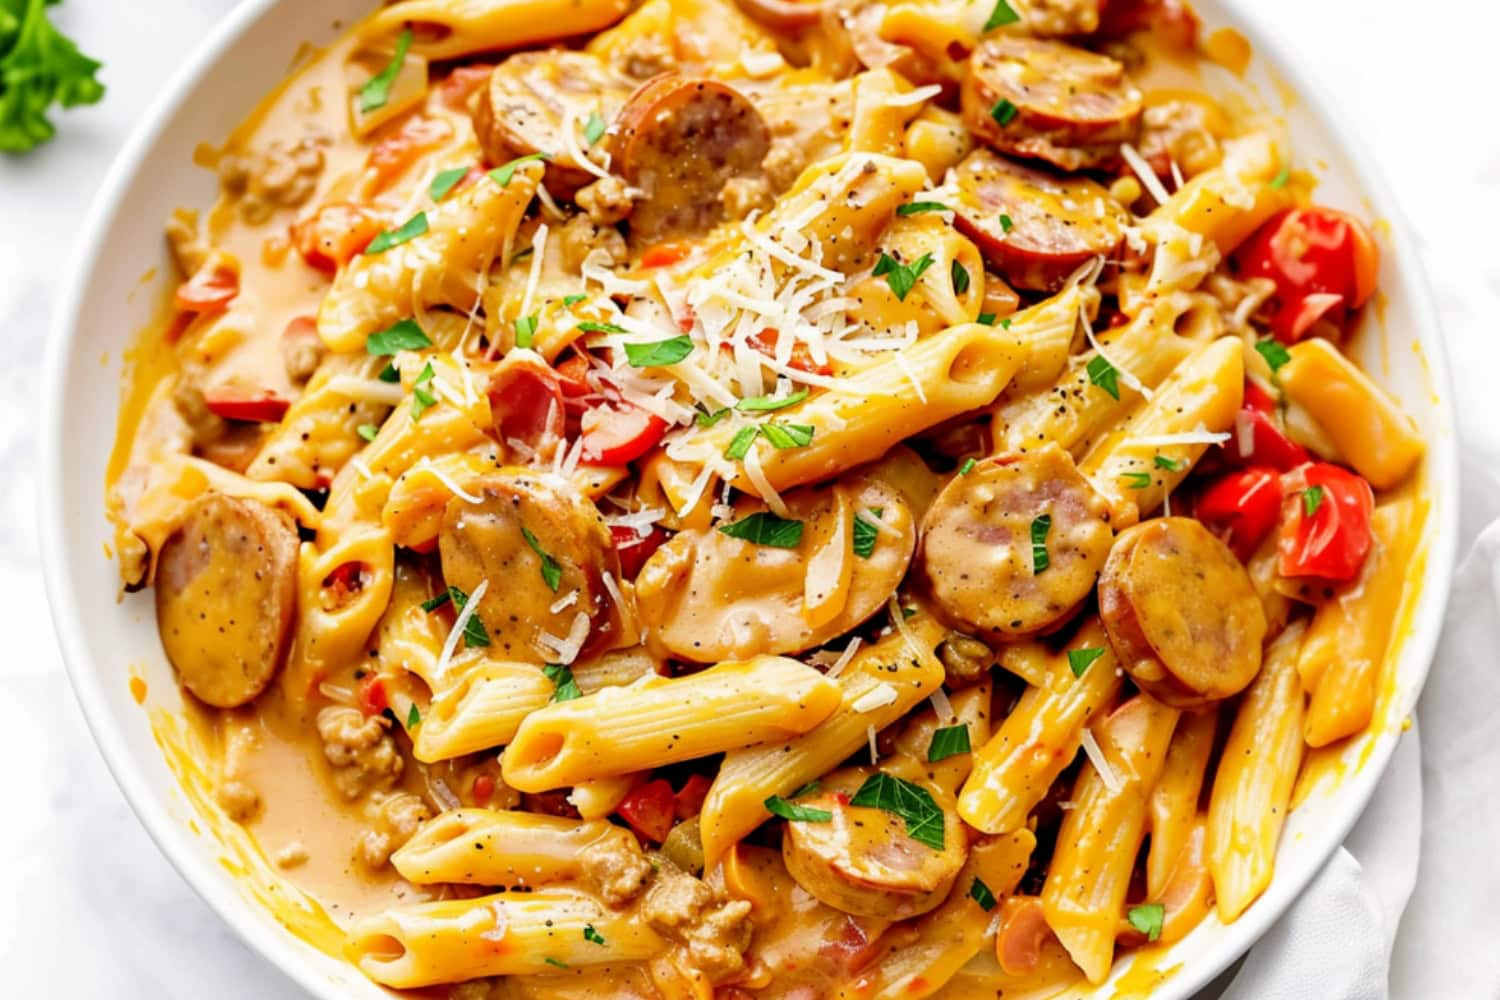 Serving of creamy cajun pasta with sliced sausage served on a white plate.